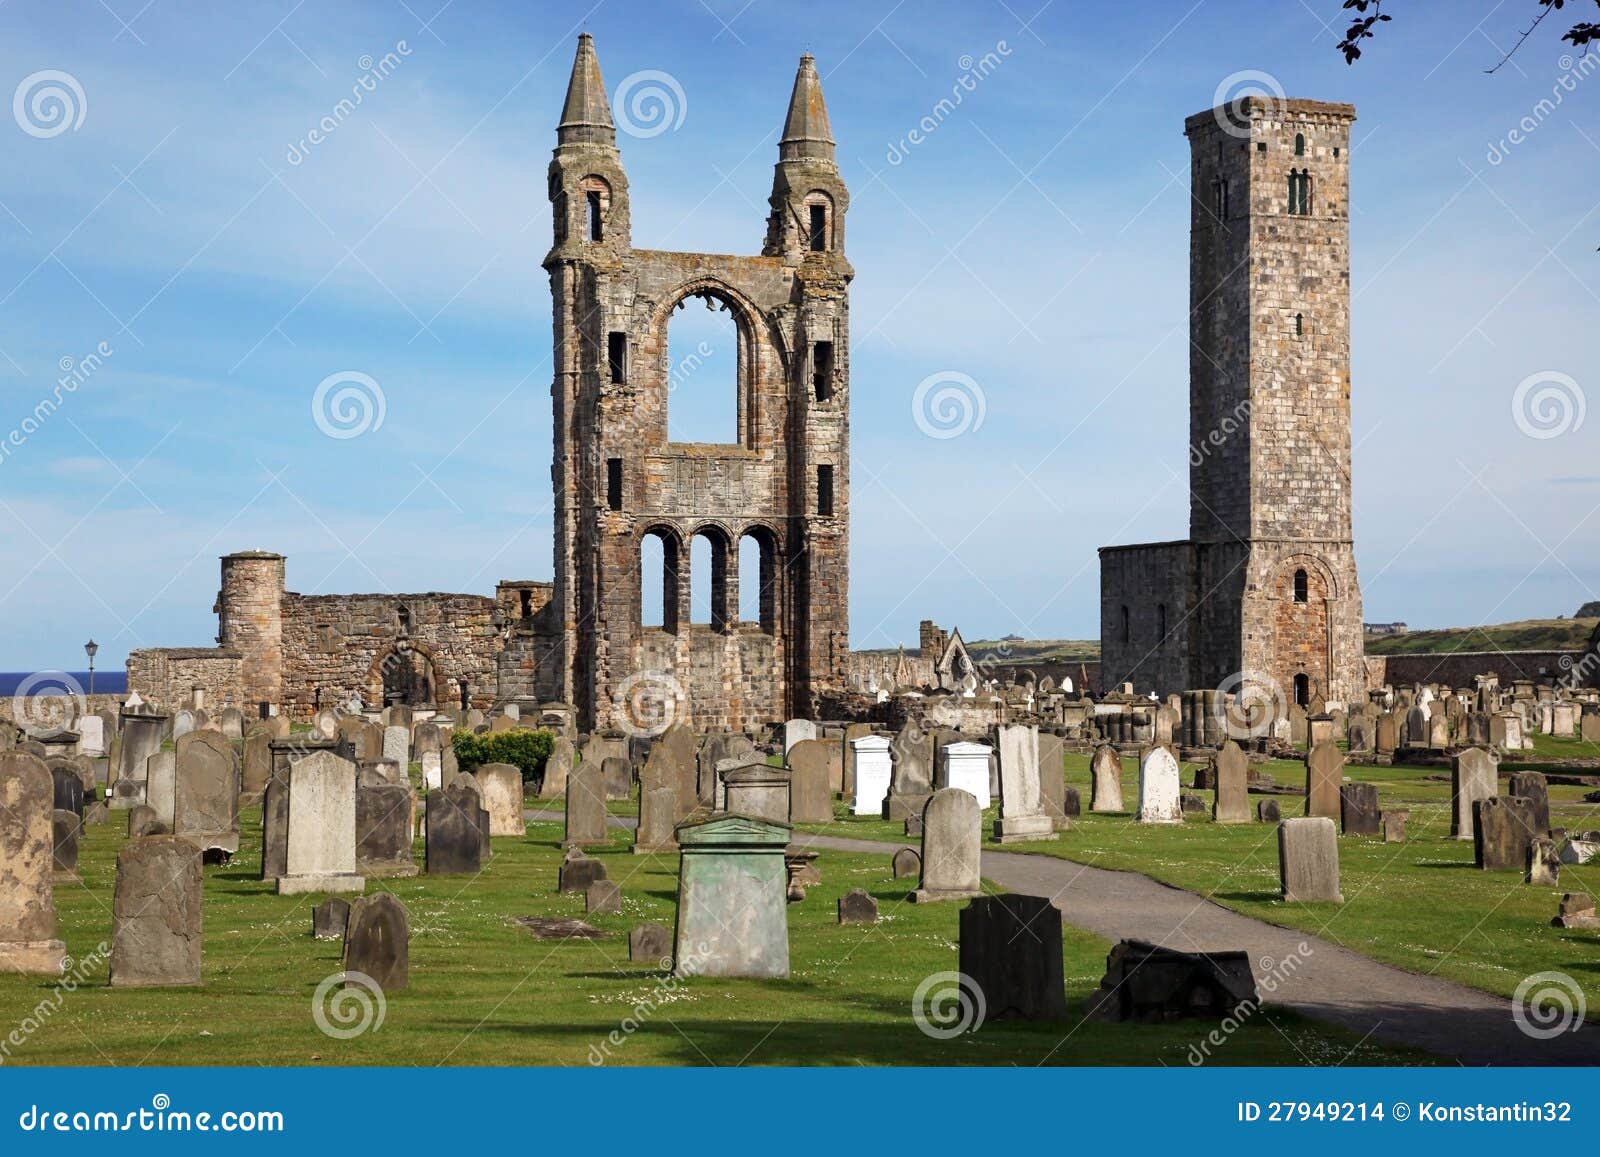 st andrews cathedral grounds